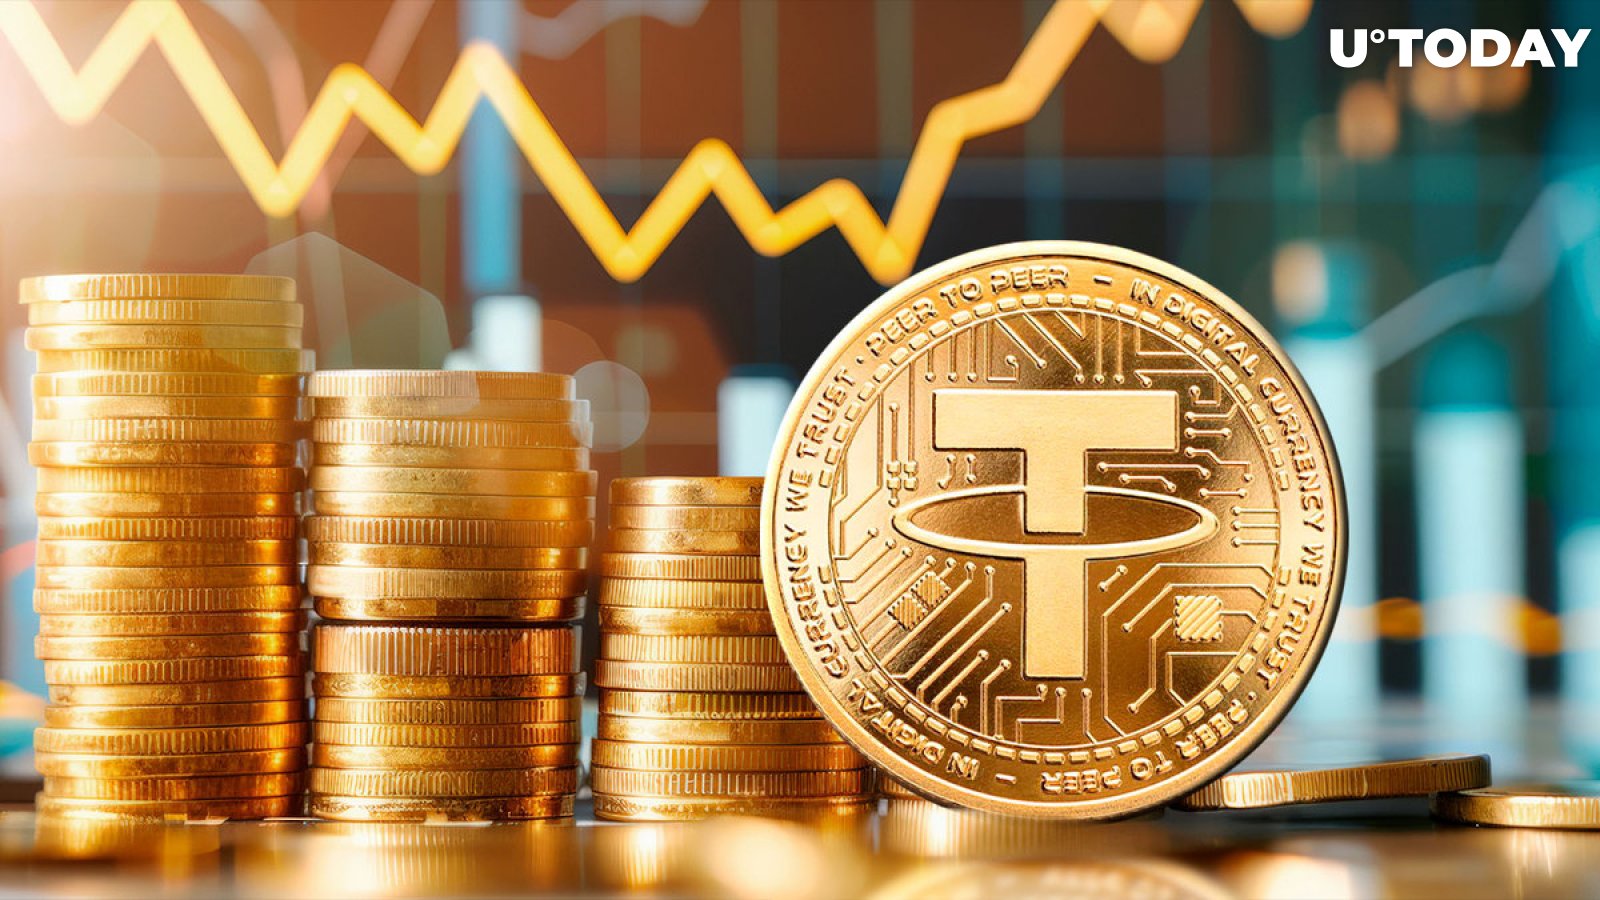 $164 Billion: Tether (USDT) Drives Stablecoin Growth to 2-Year High